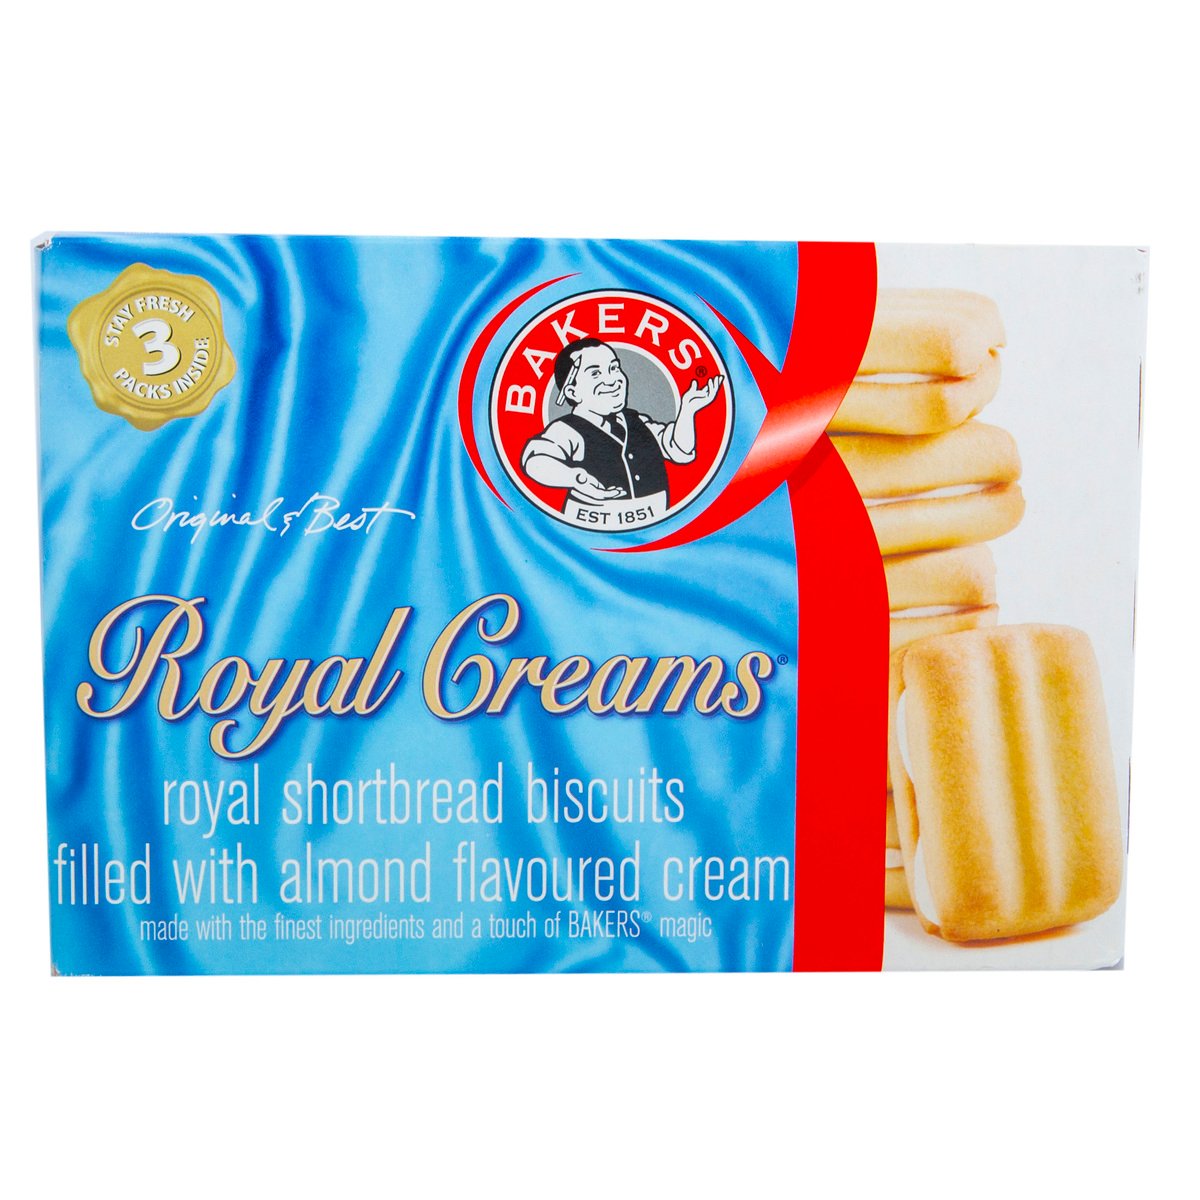 Bakers Royal Creams Shortbread Biscuits Filled With Almond Flavoured Cream 280g